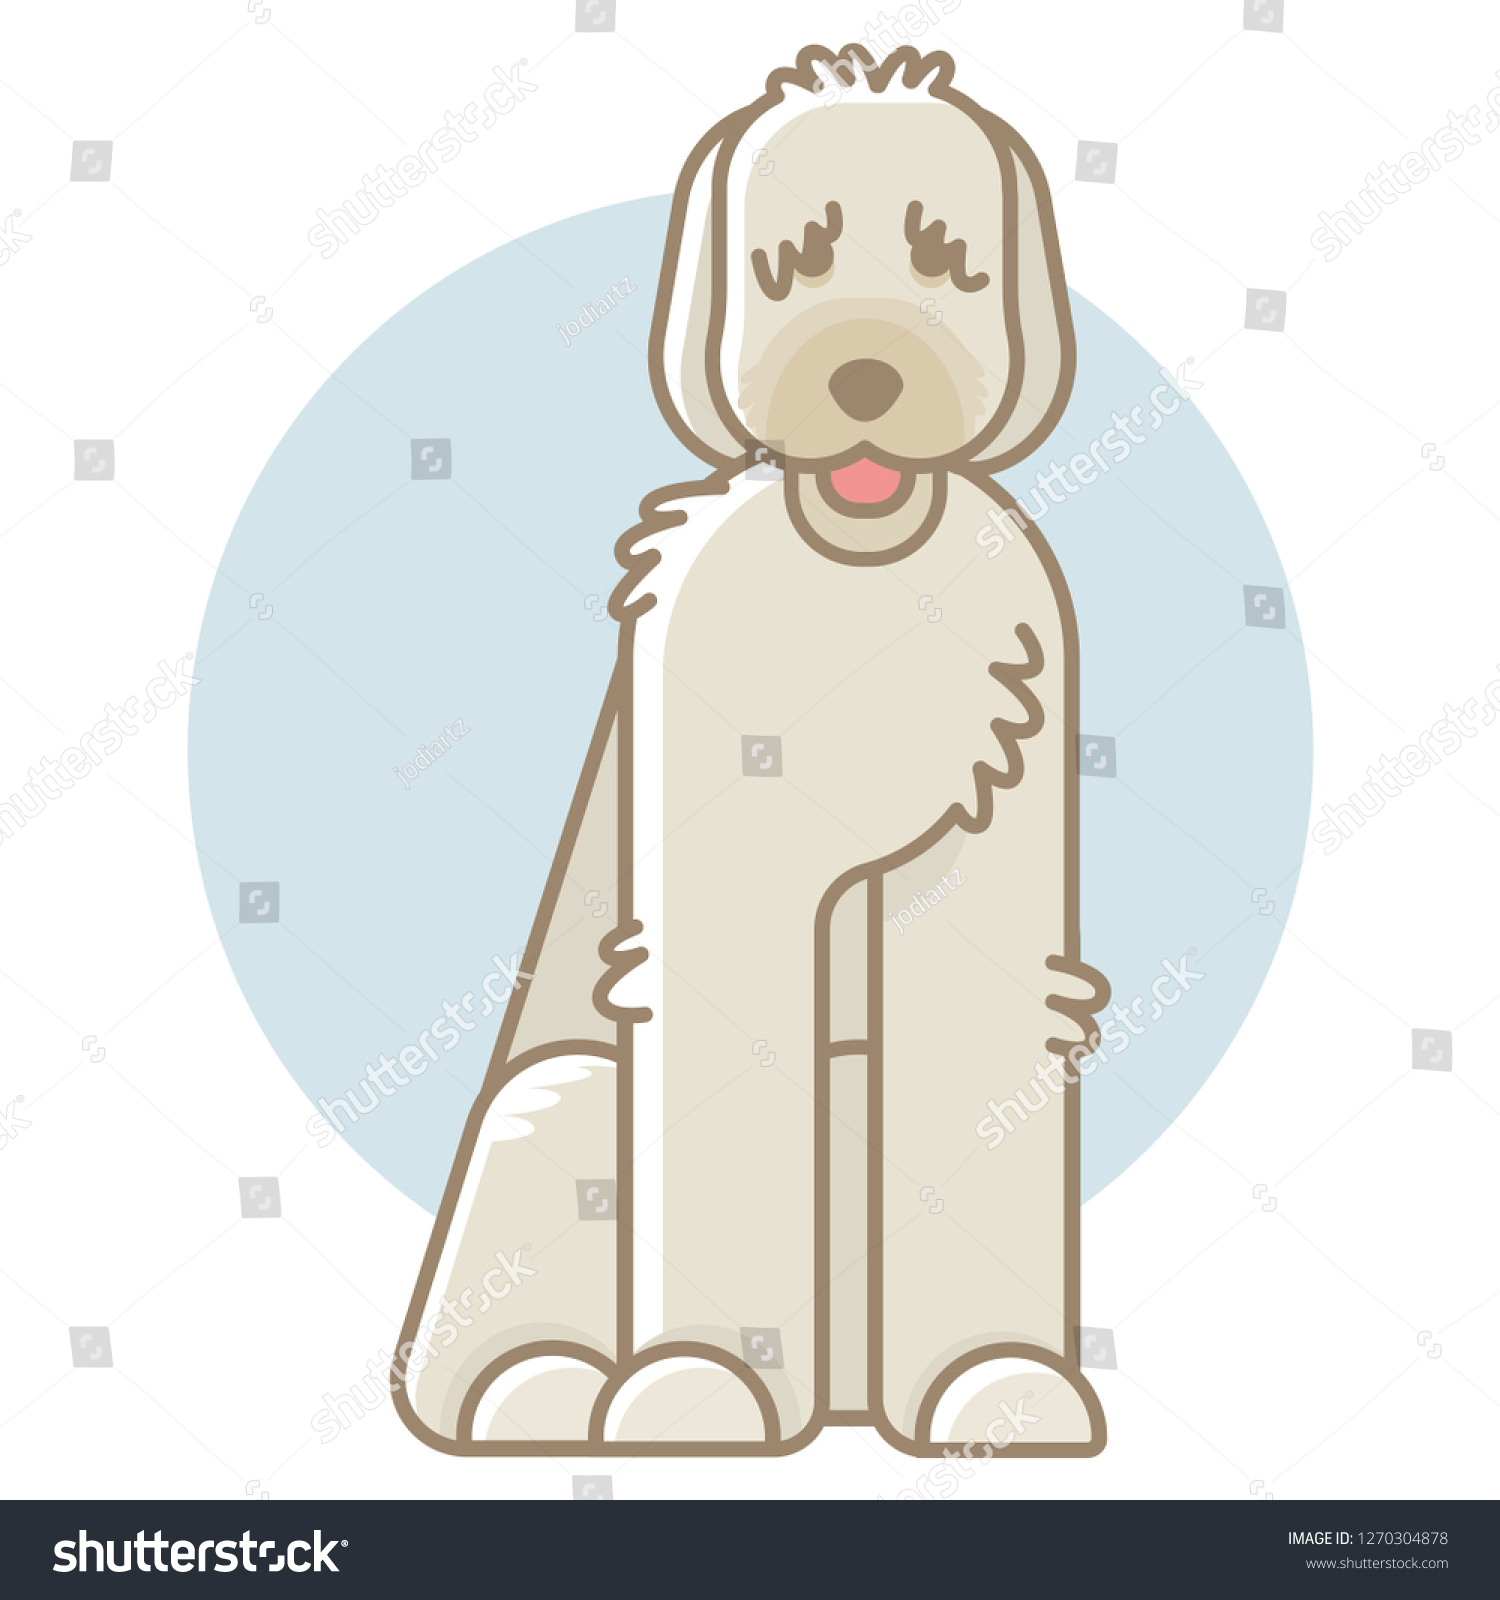 SVG of labradoodle logo and icon concept, labradoodle vector illustration. svg